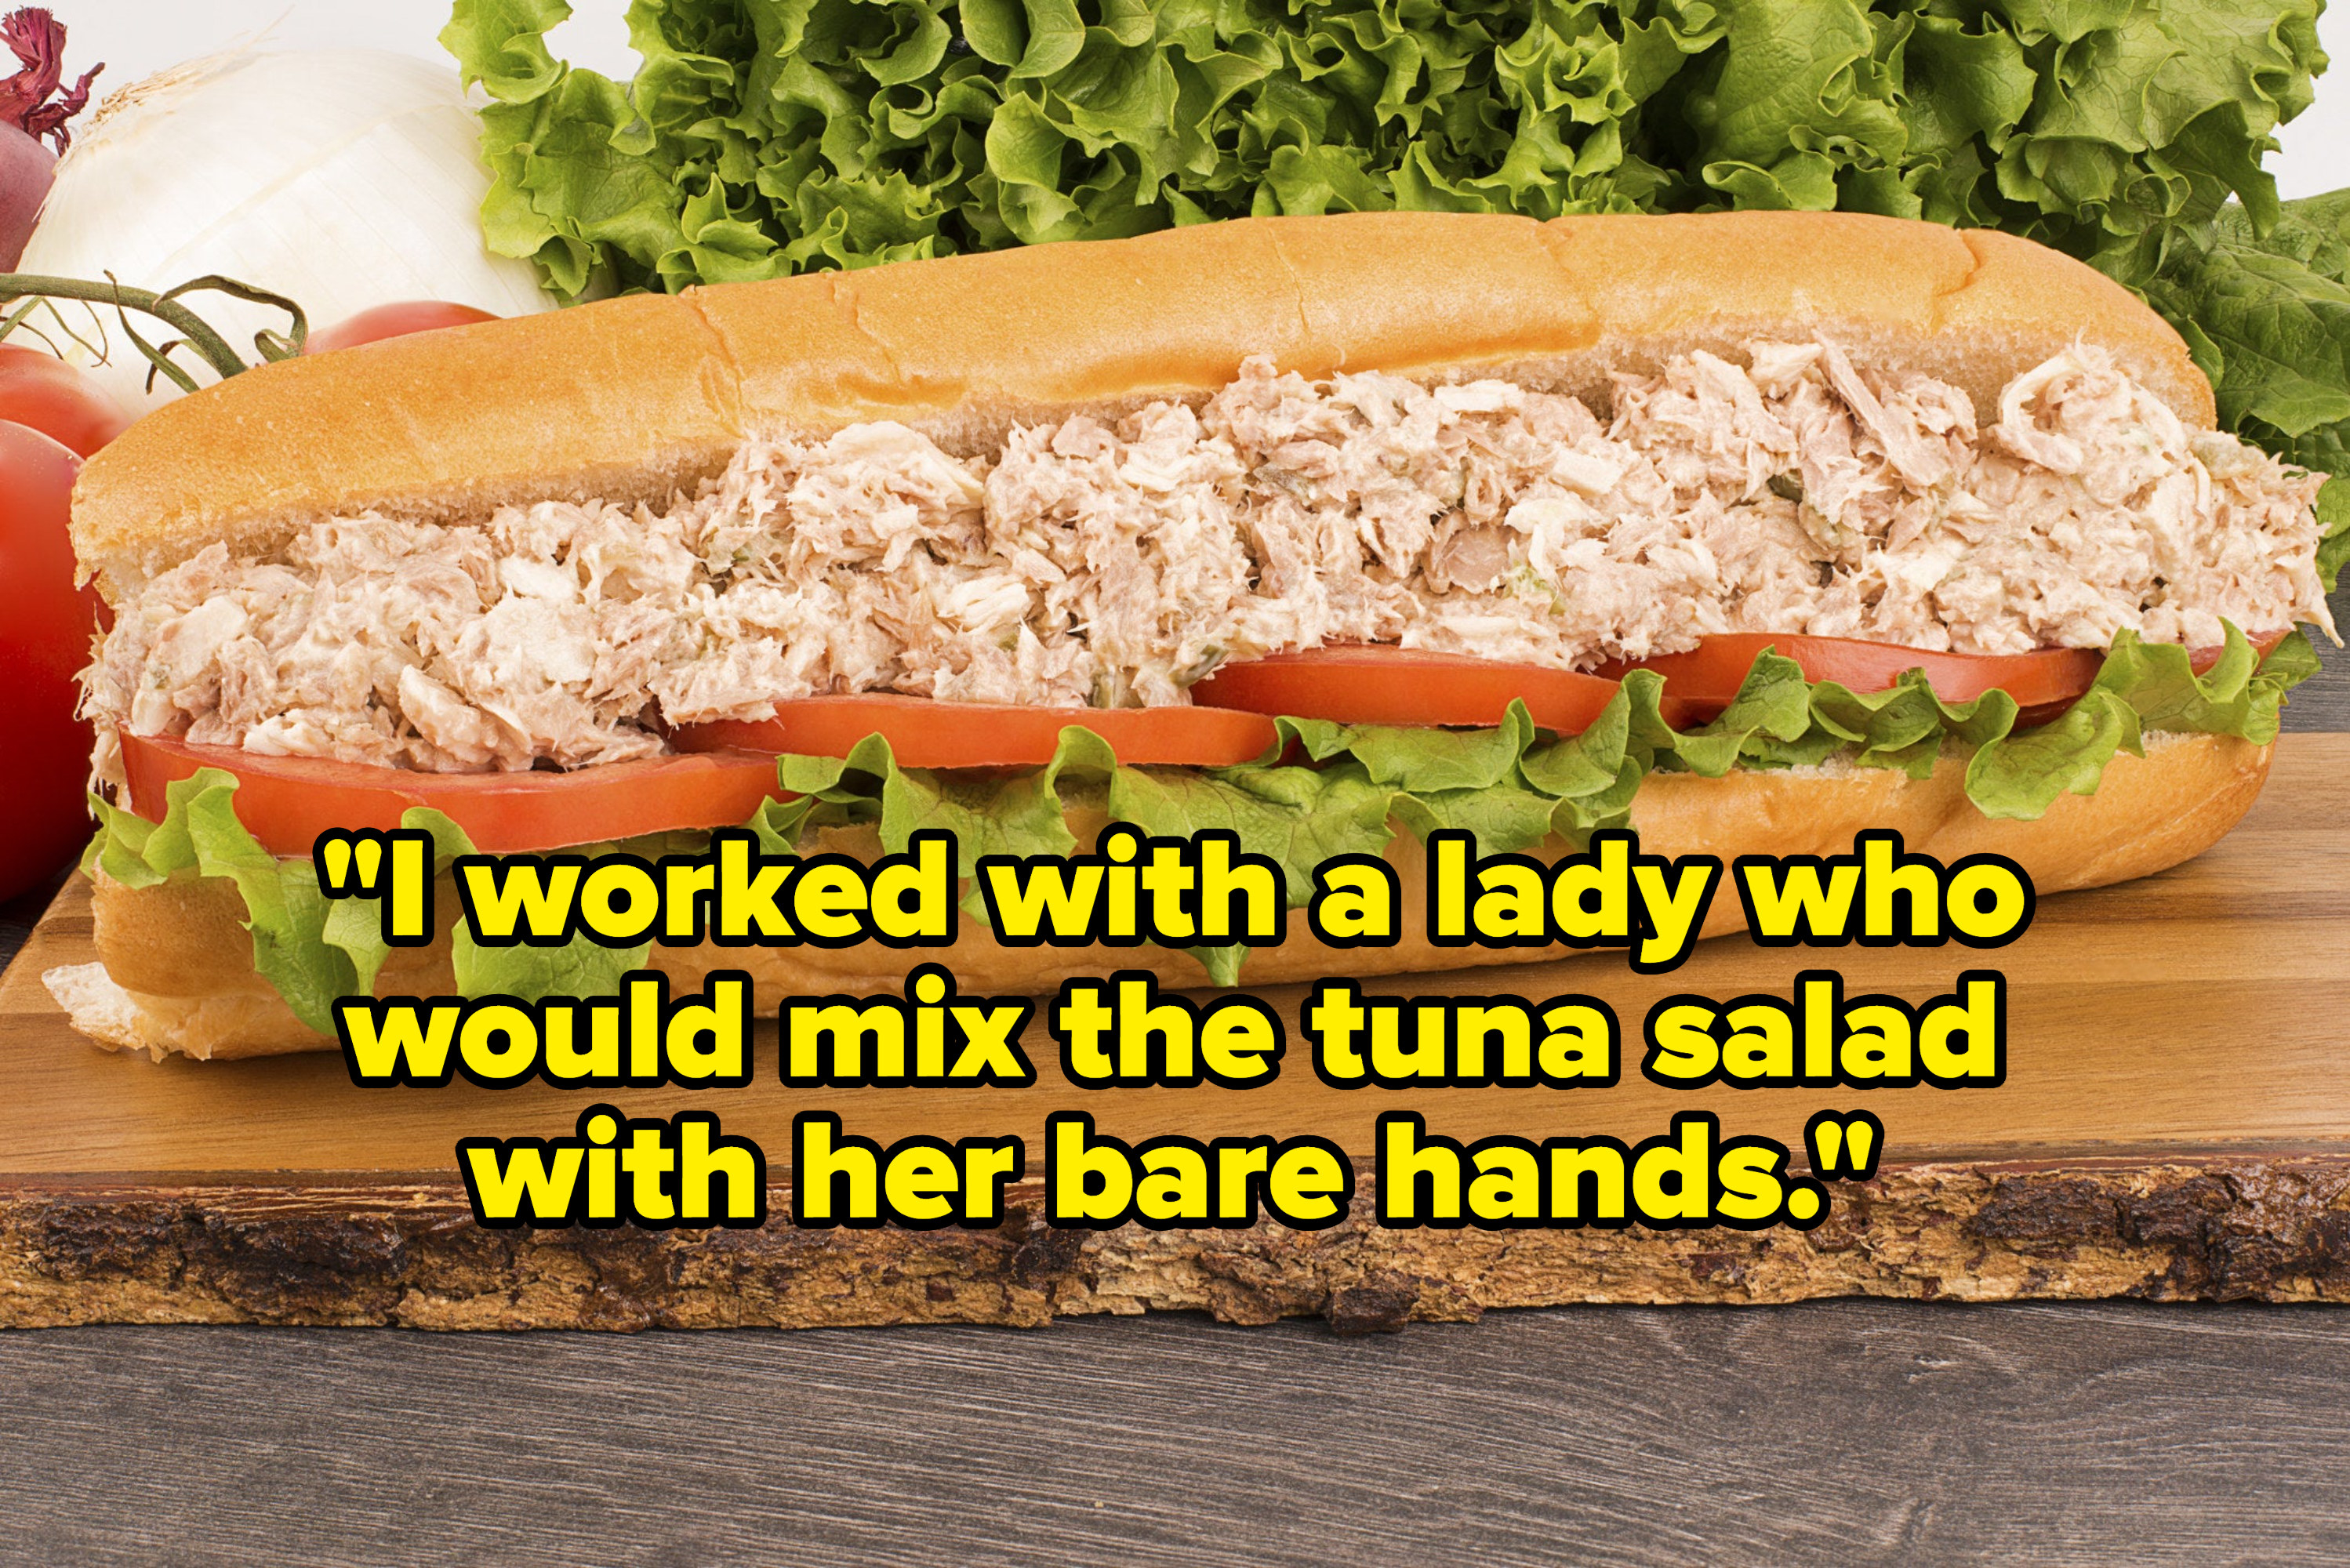 &quot;I worked with a lady who would mix the tuna salad with her bare hands&quot; over a tuna salad sub